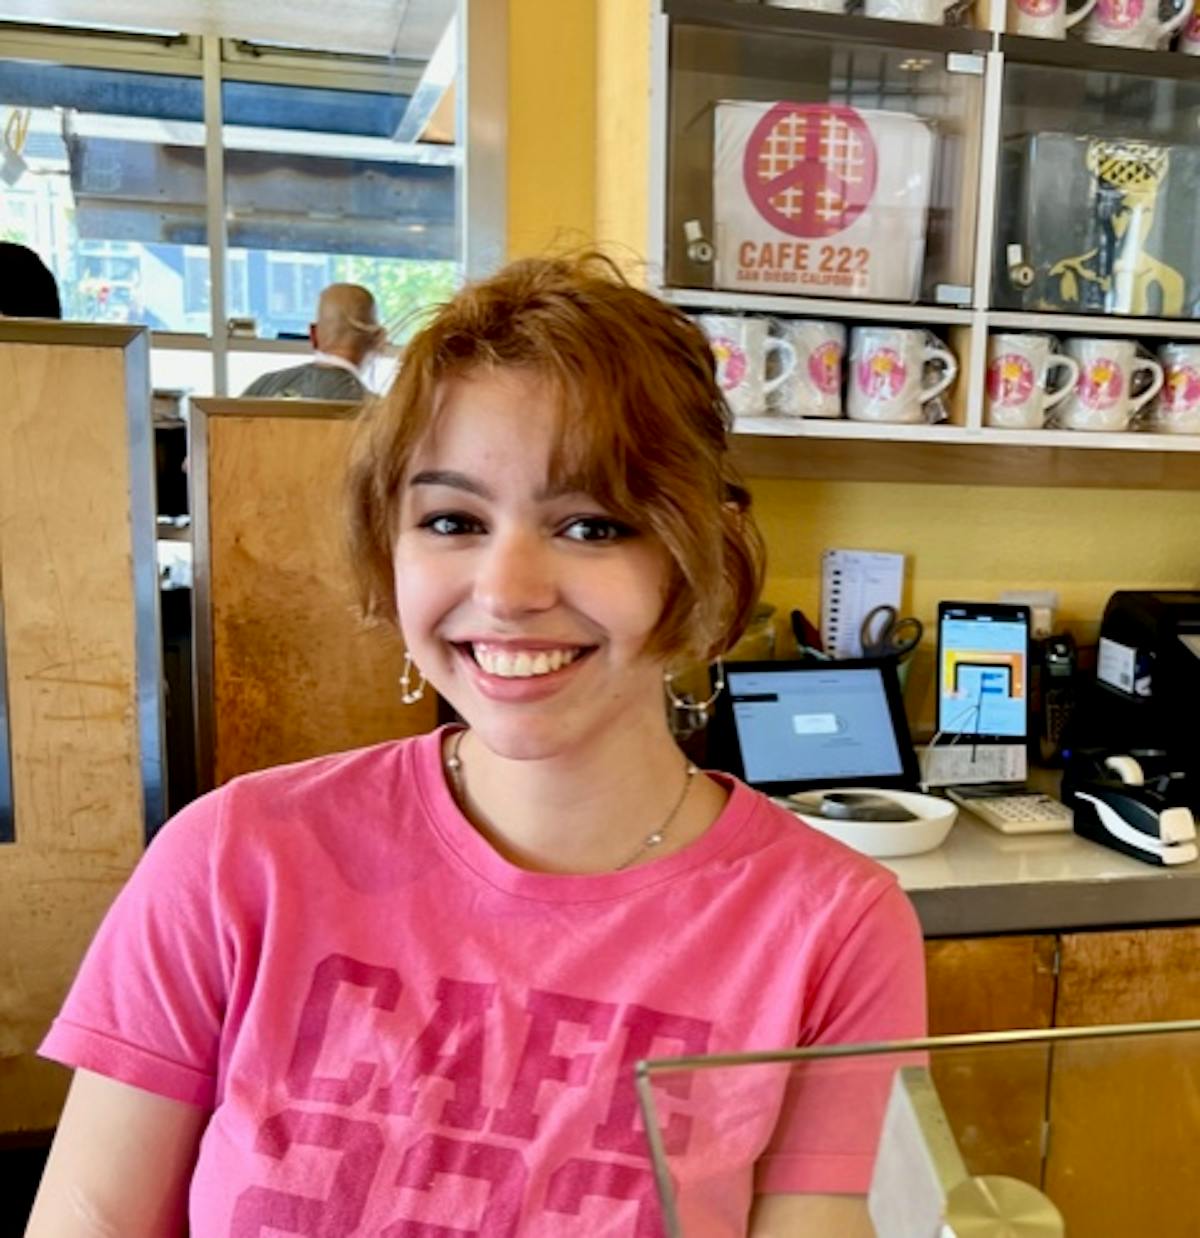 a girl sitting at a table and smiling at the camera